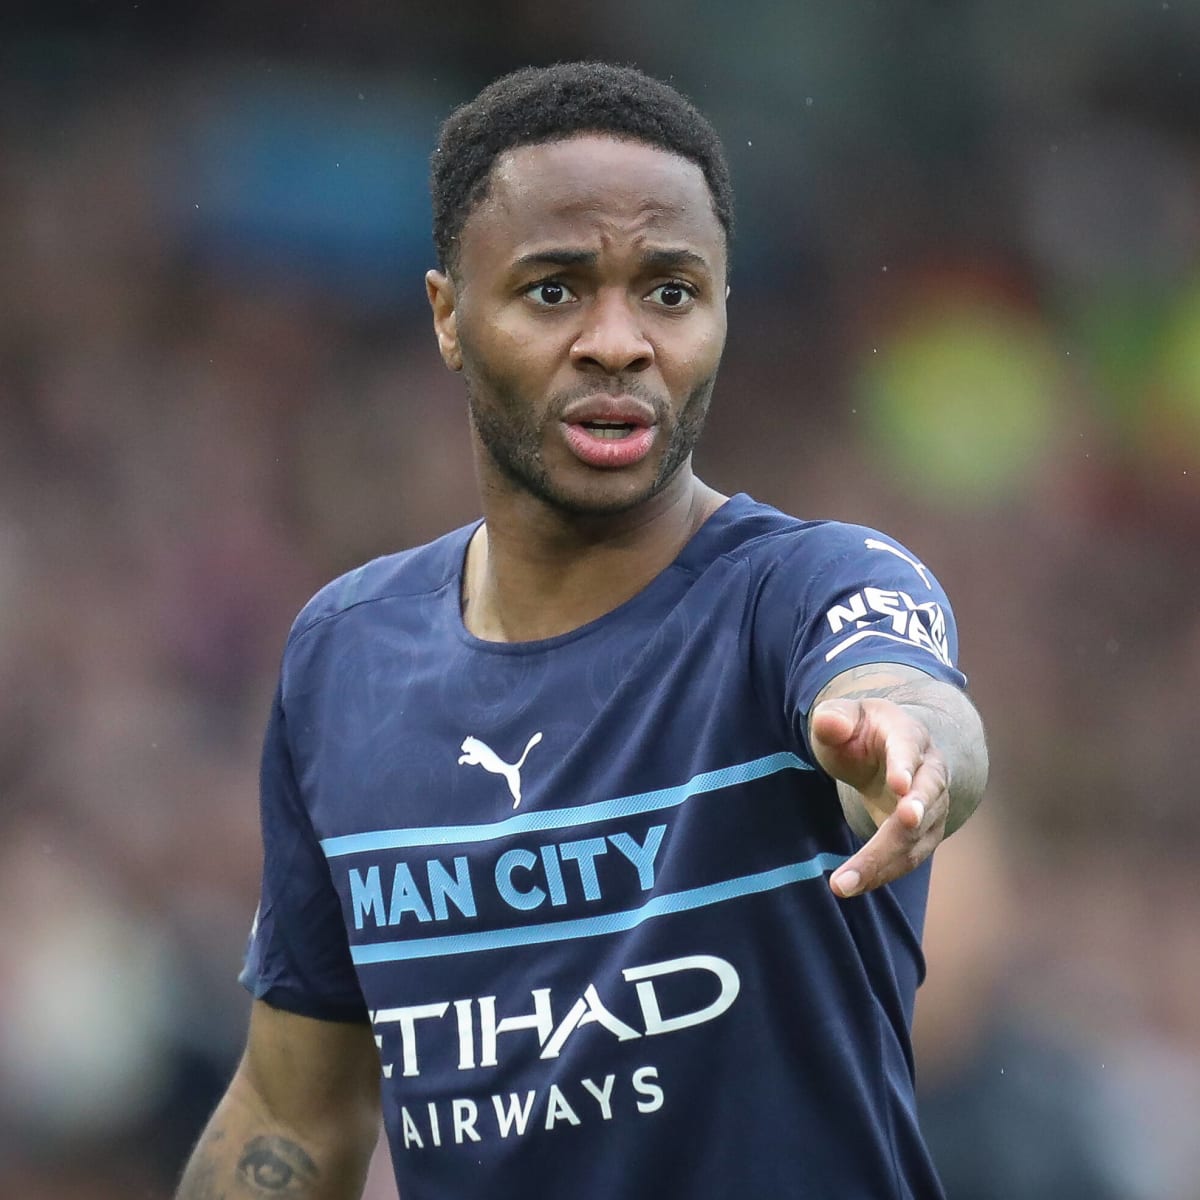 Chelsea is interested in signing Raheem Sterling, a winger for Manchester City.